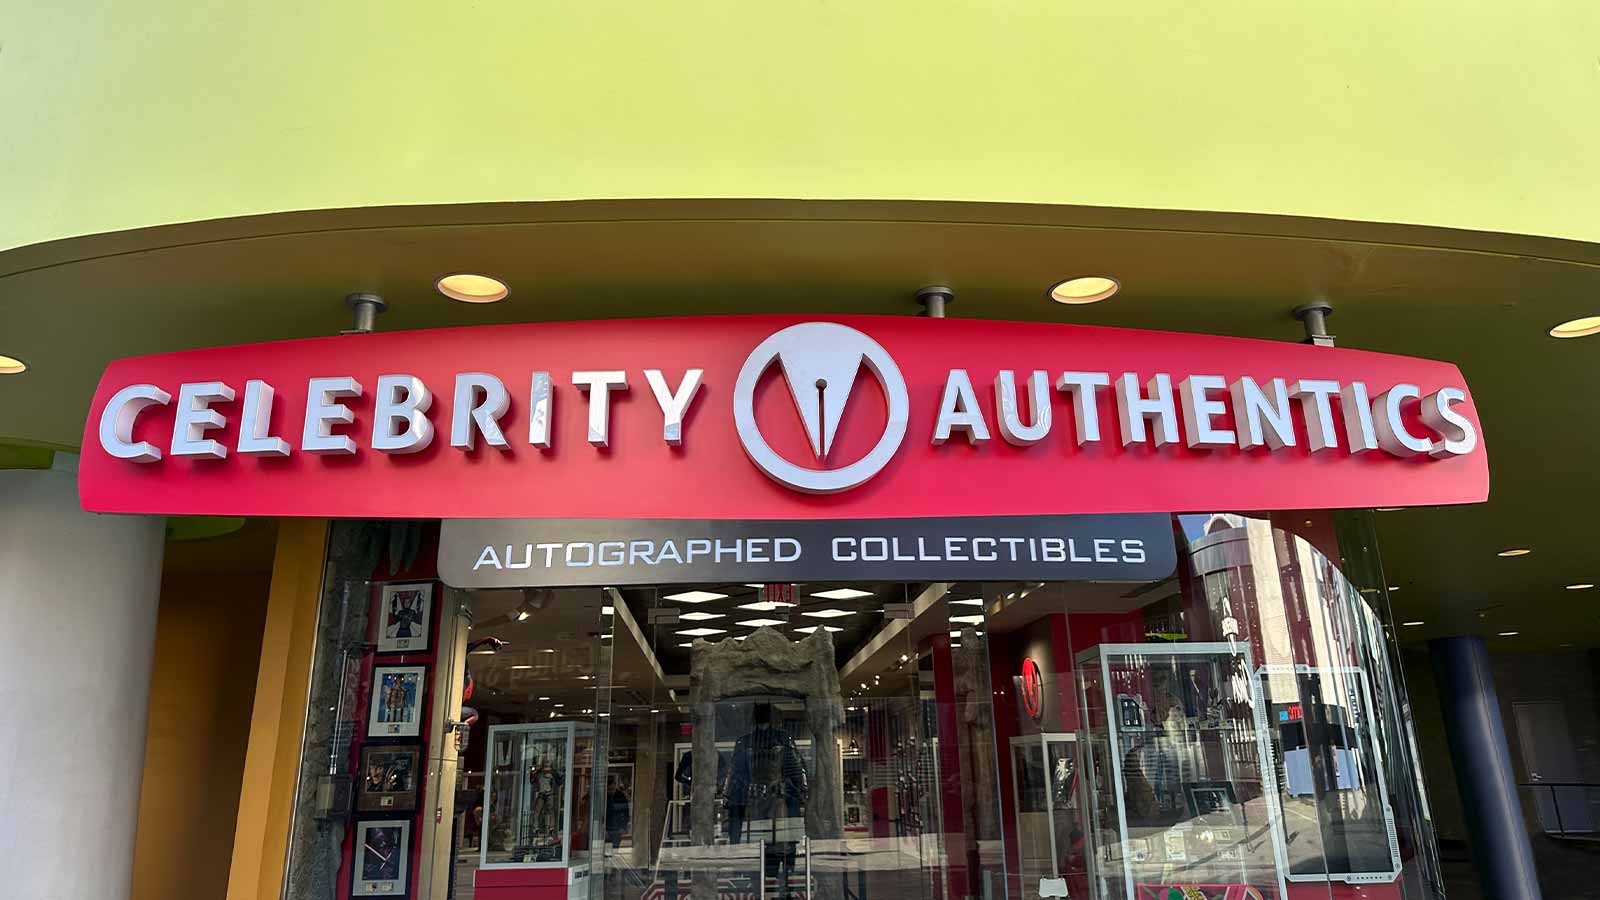 celebrity authentics store sign attached to the facade